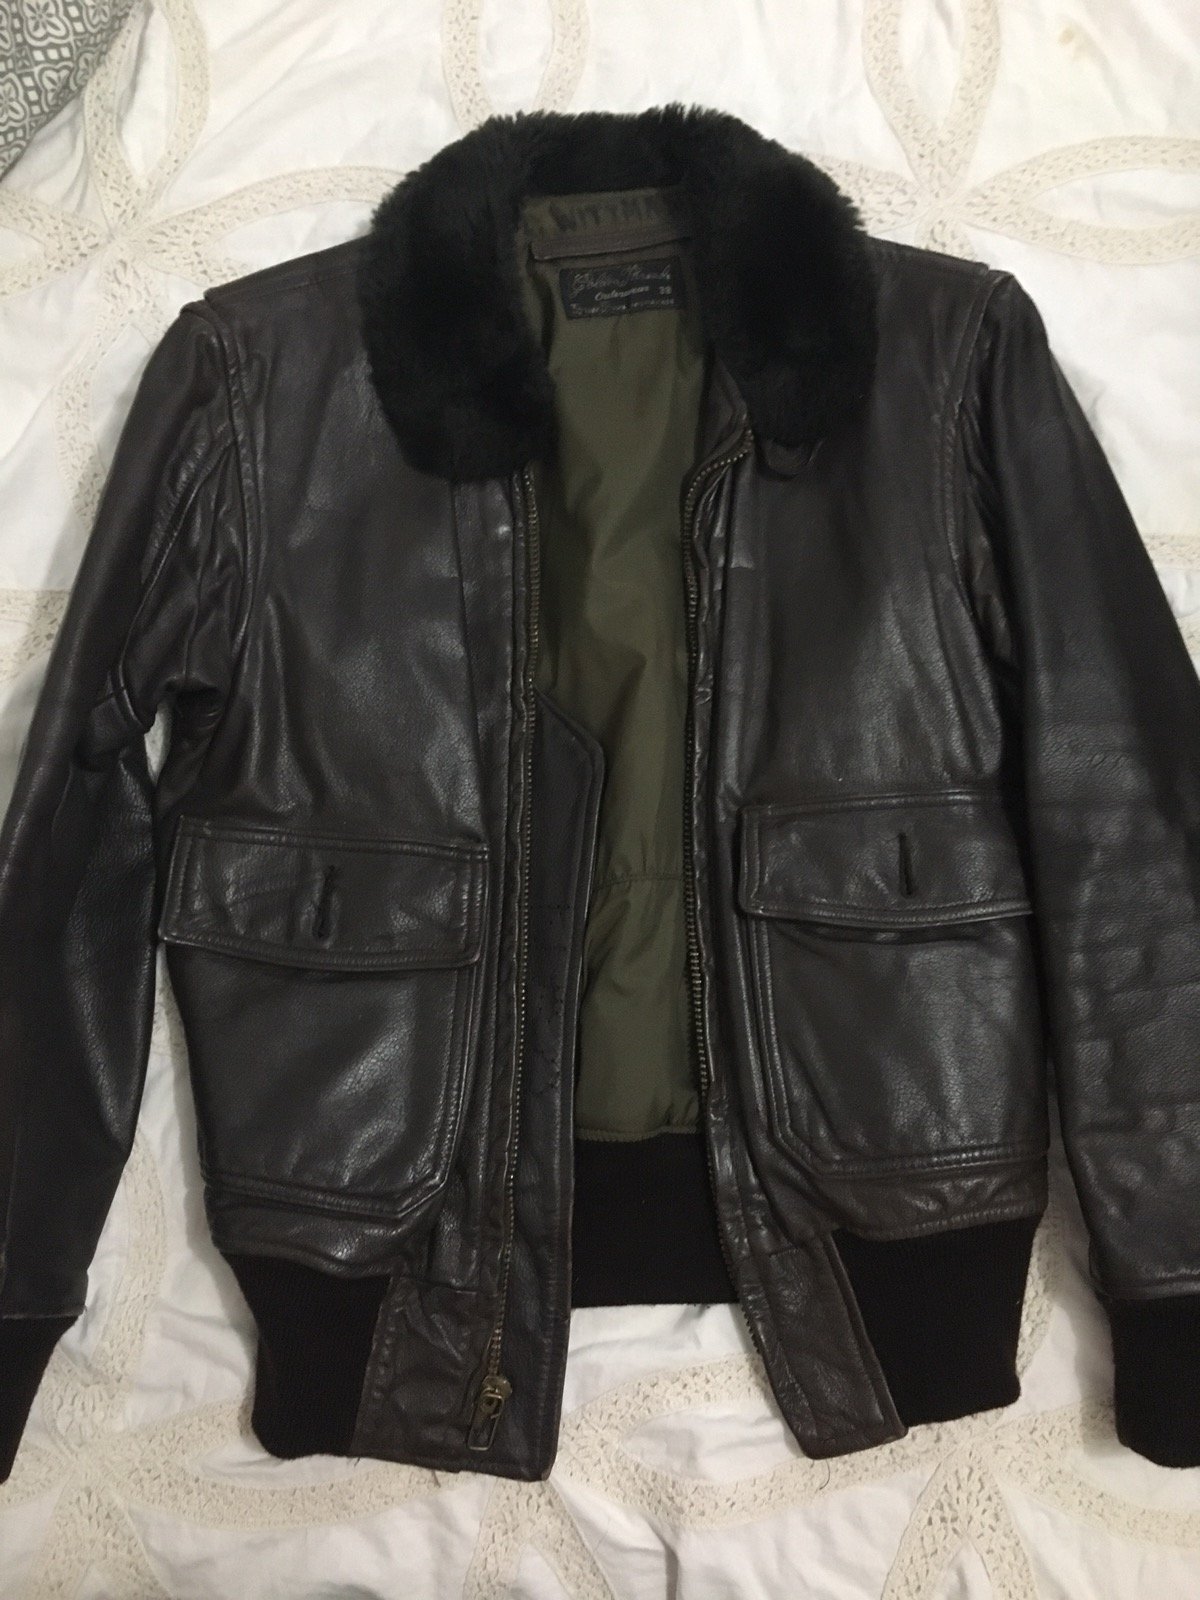 Found this jacket at a garage sale. | Vintage Leather Jackets Forum